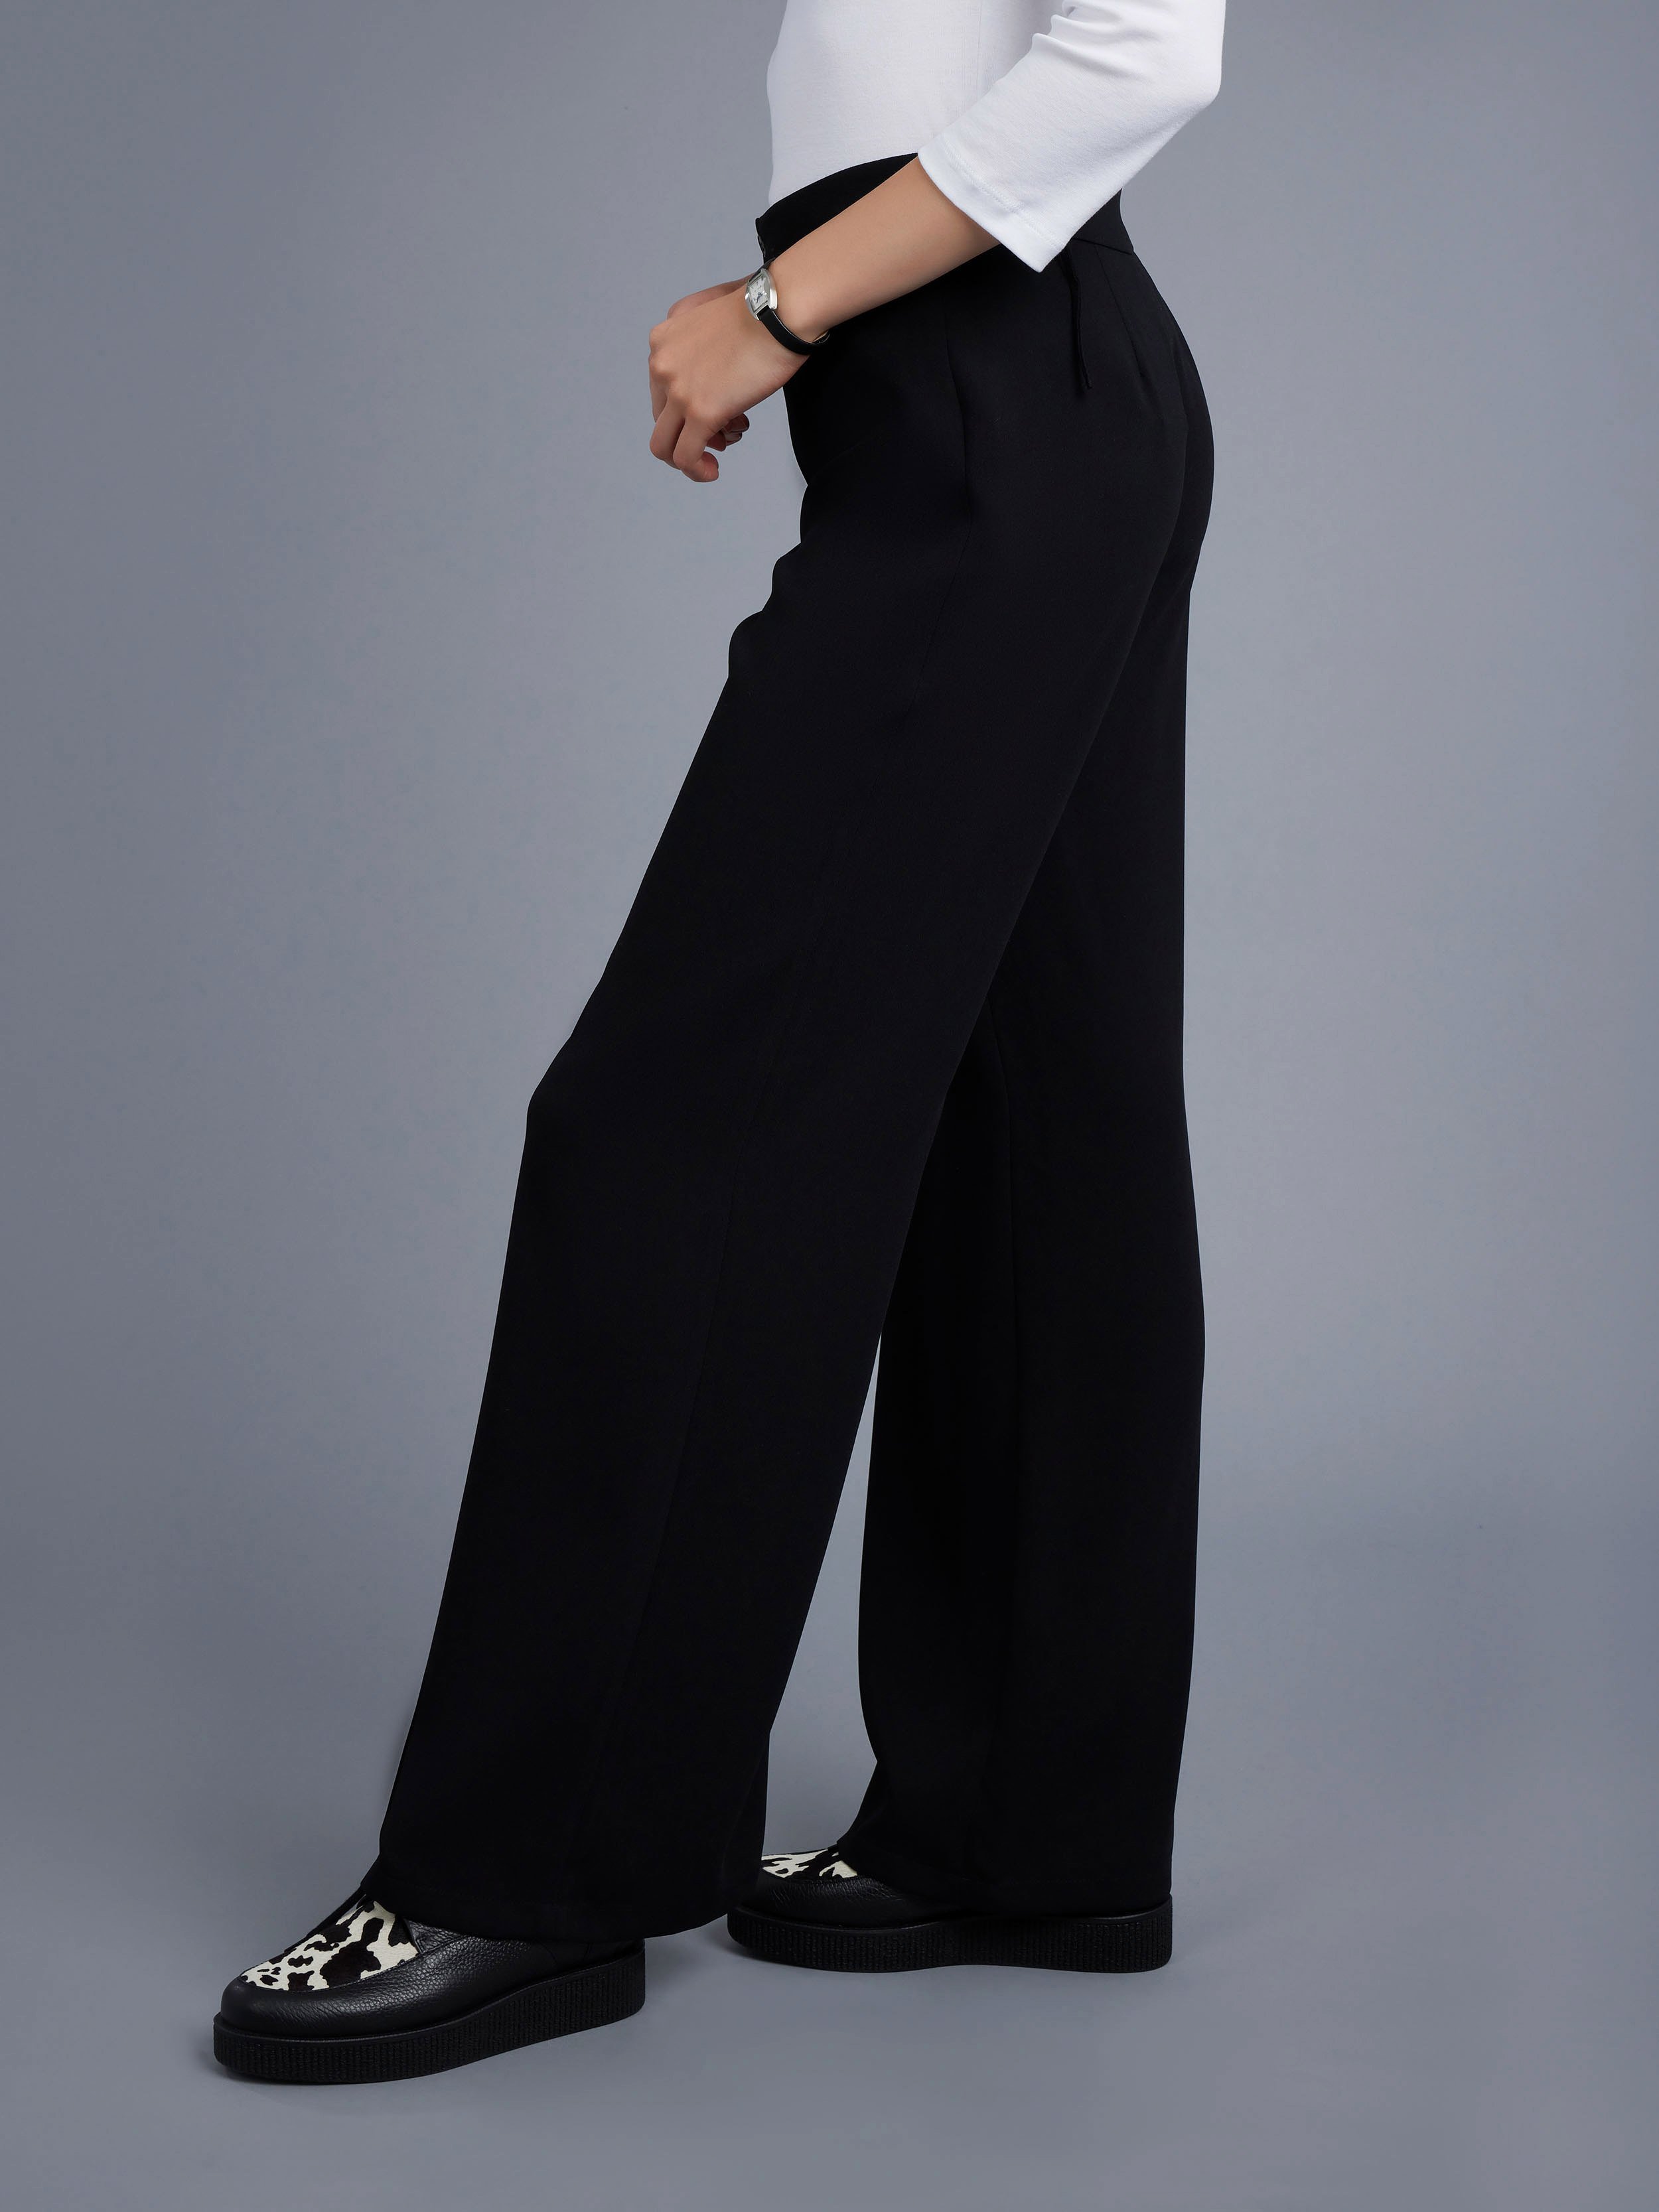 Black Cotton Highwaist Formal Pant For Women in Nepal - Buy Pants, Trousers  & Leggings at Best Price at Thulo.Com